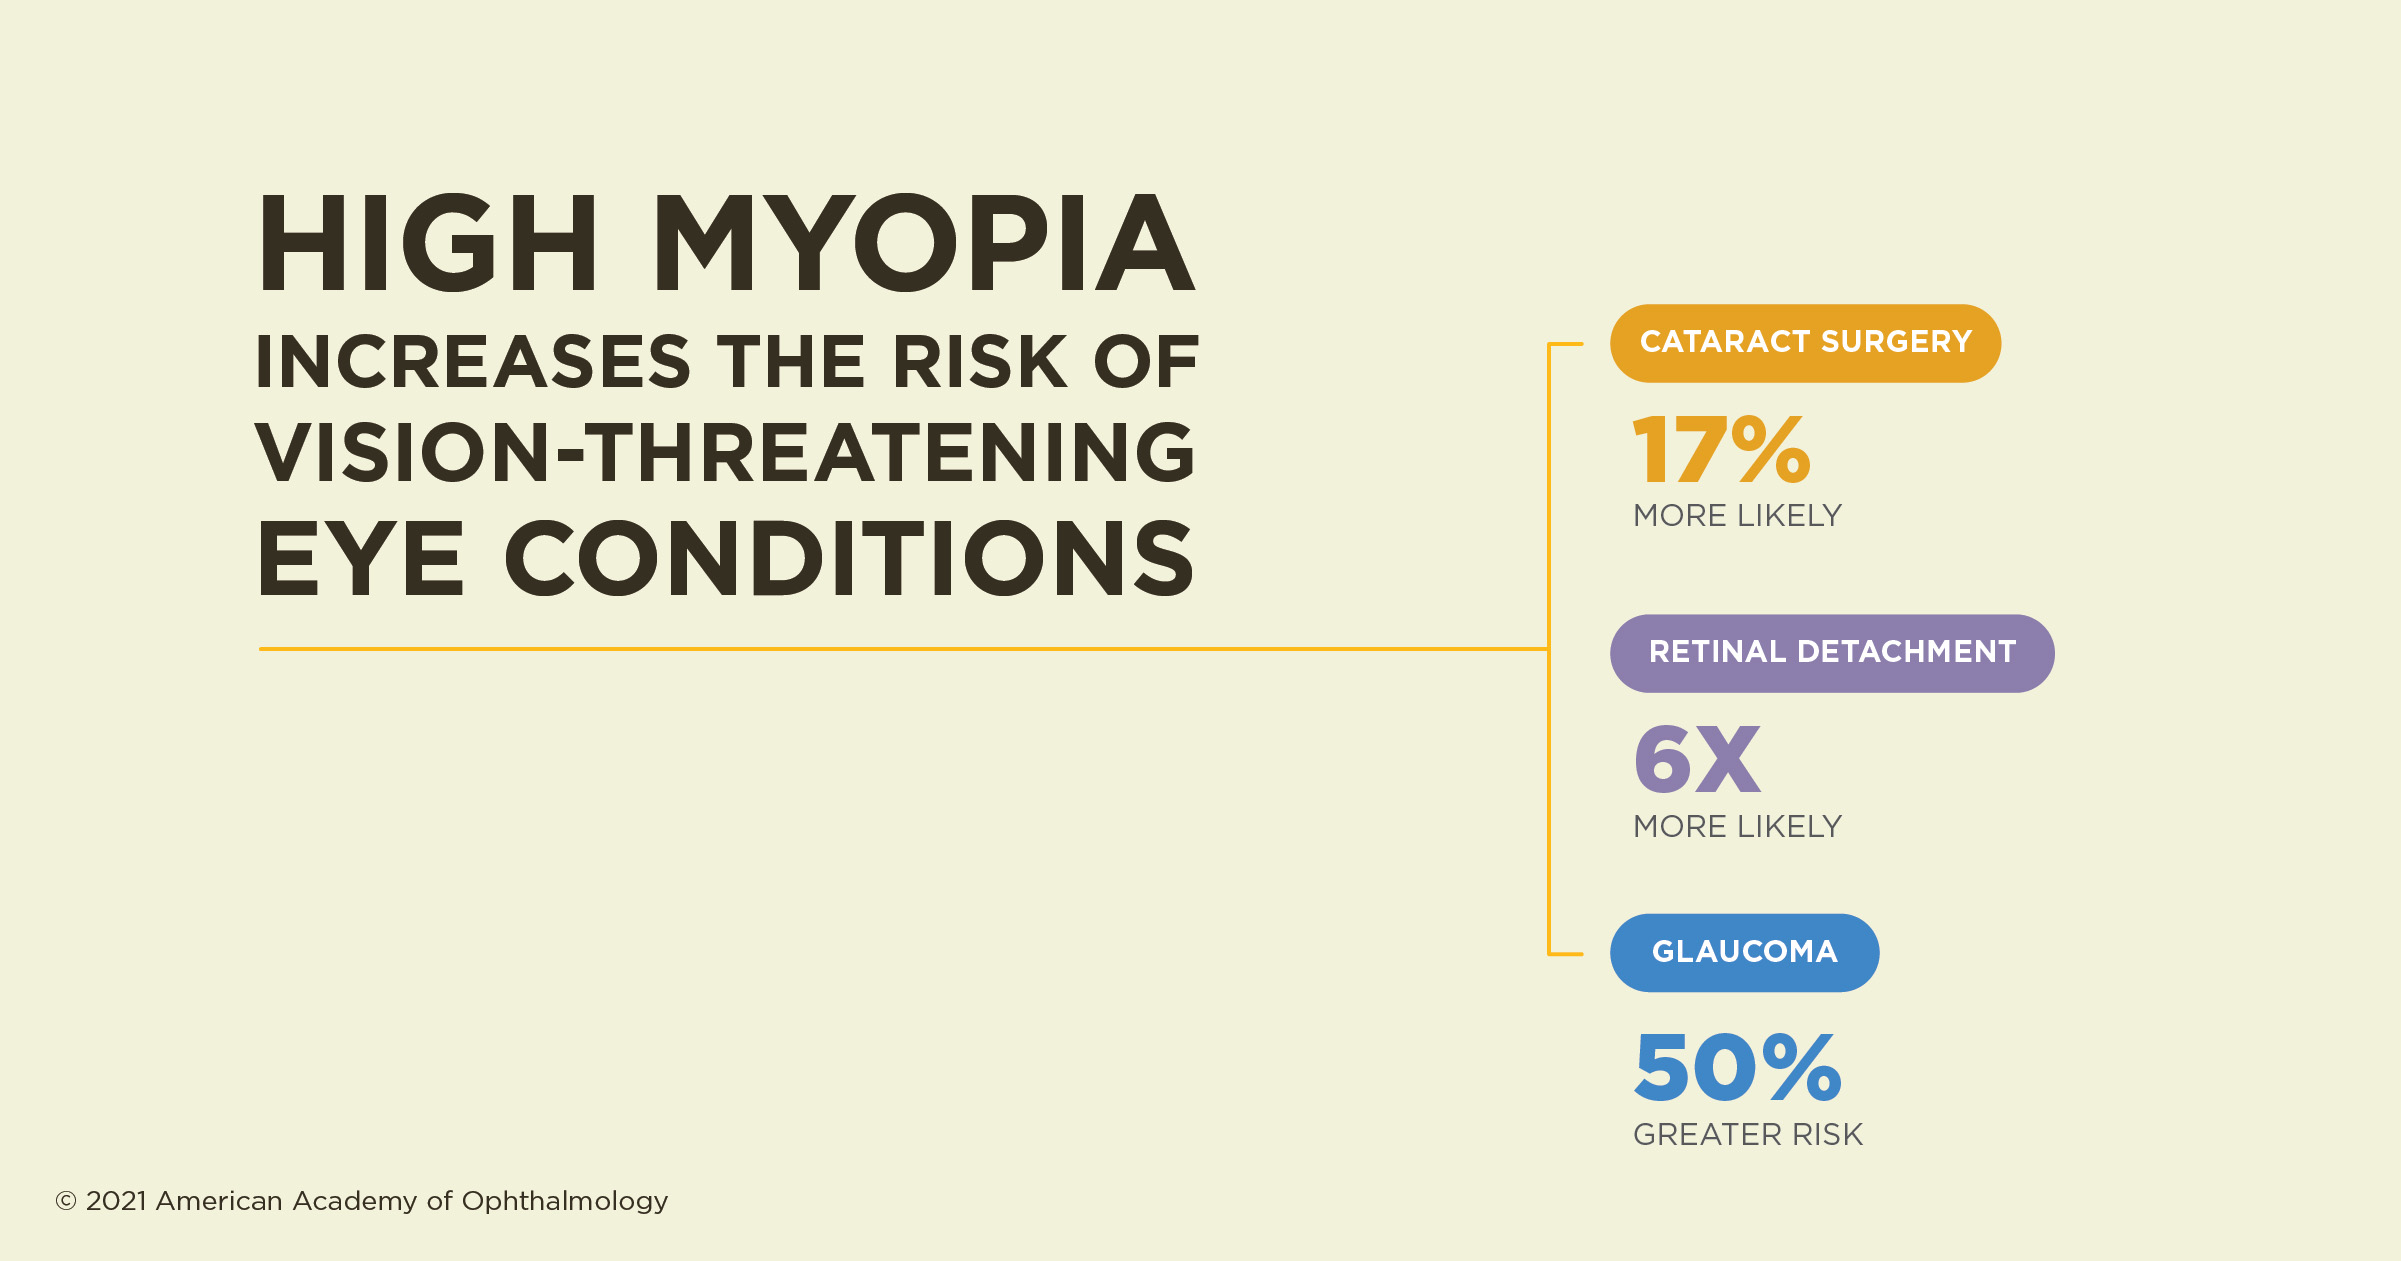 High myopia increases the risk of vision-threatening eye conditions